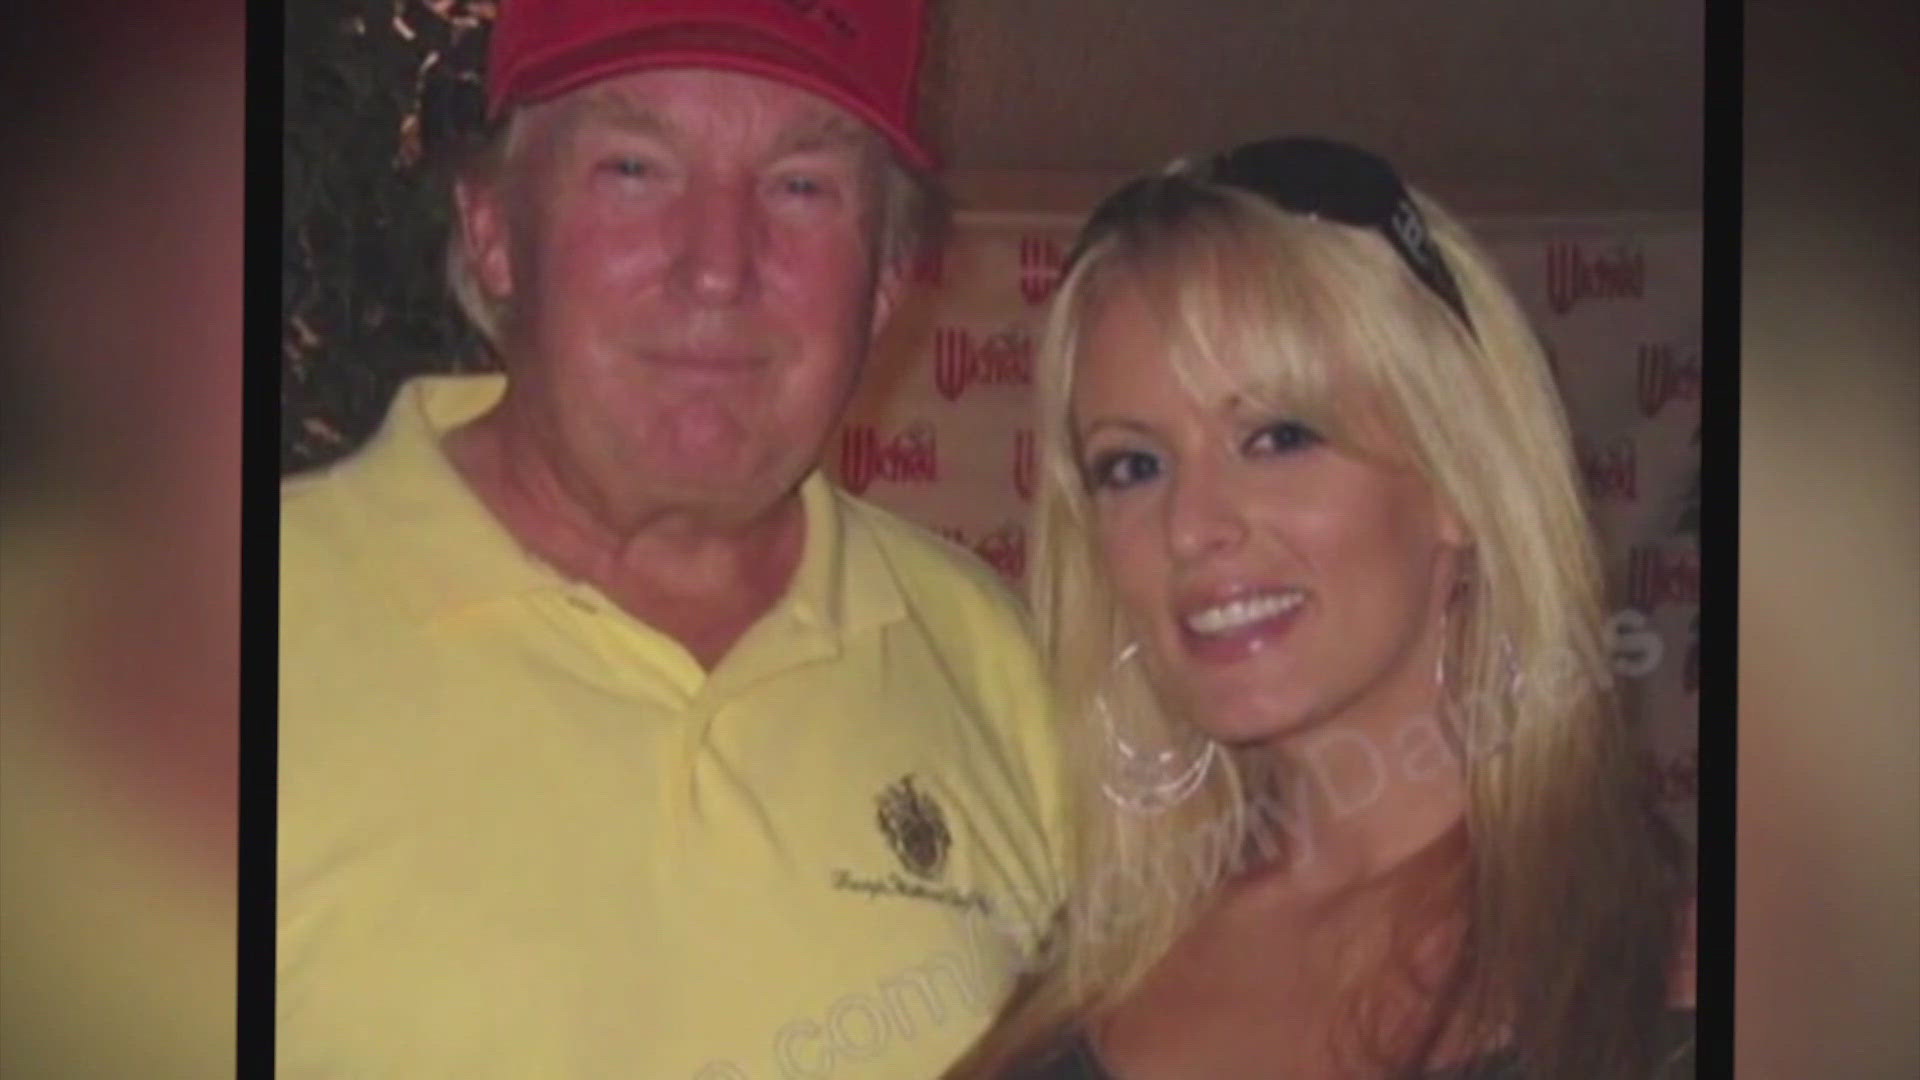 Former President Donald Trump is accused of sending money to Stormy Daniels in exchange for her silence during his presidential campaign.